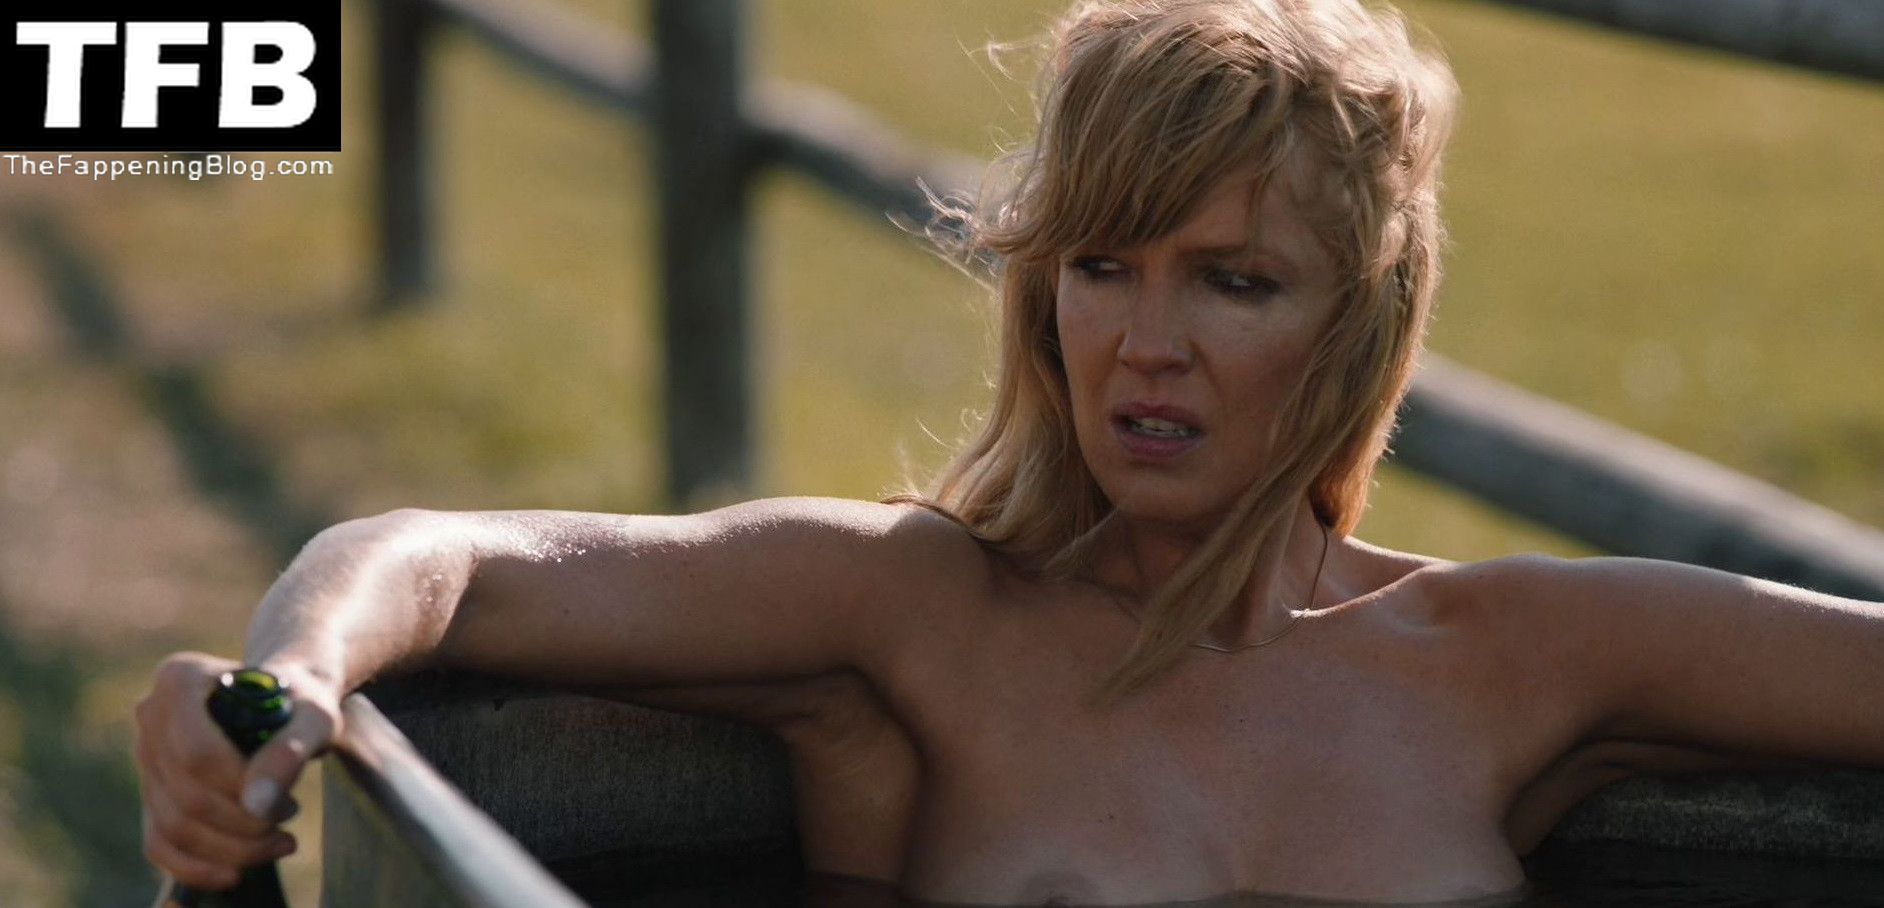 Kelly reilly leaked nude